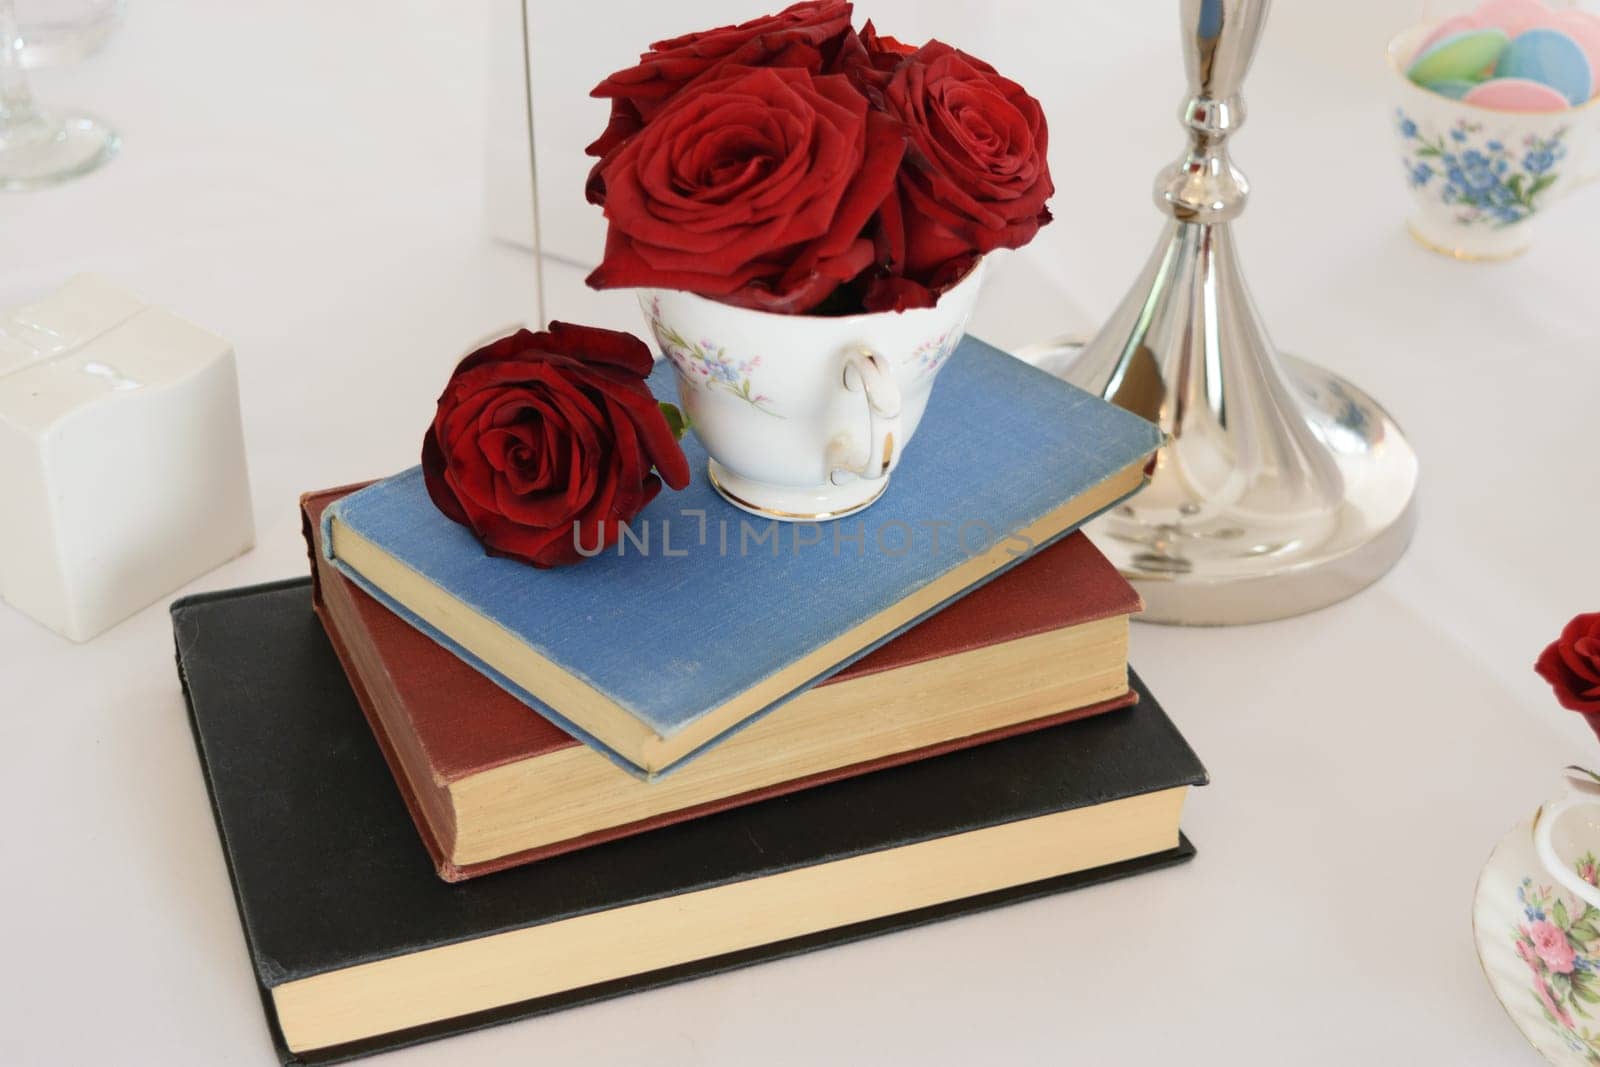 A stack of three books with a teacup filled with red roses on top, placed on a white tablecloth.